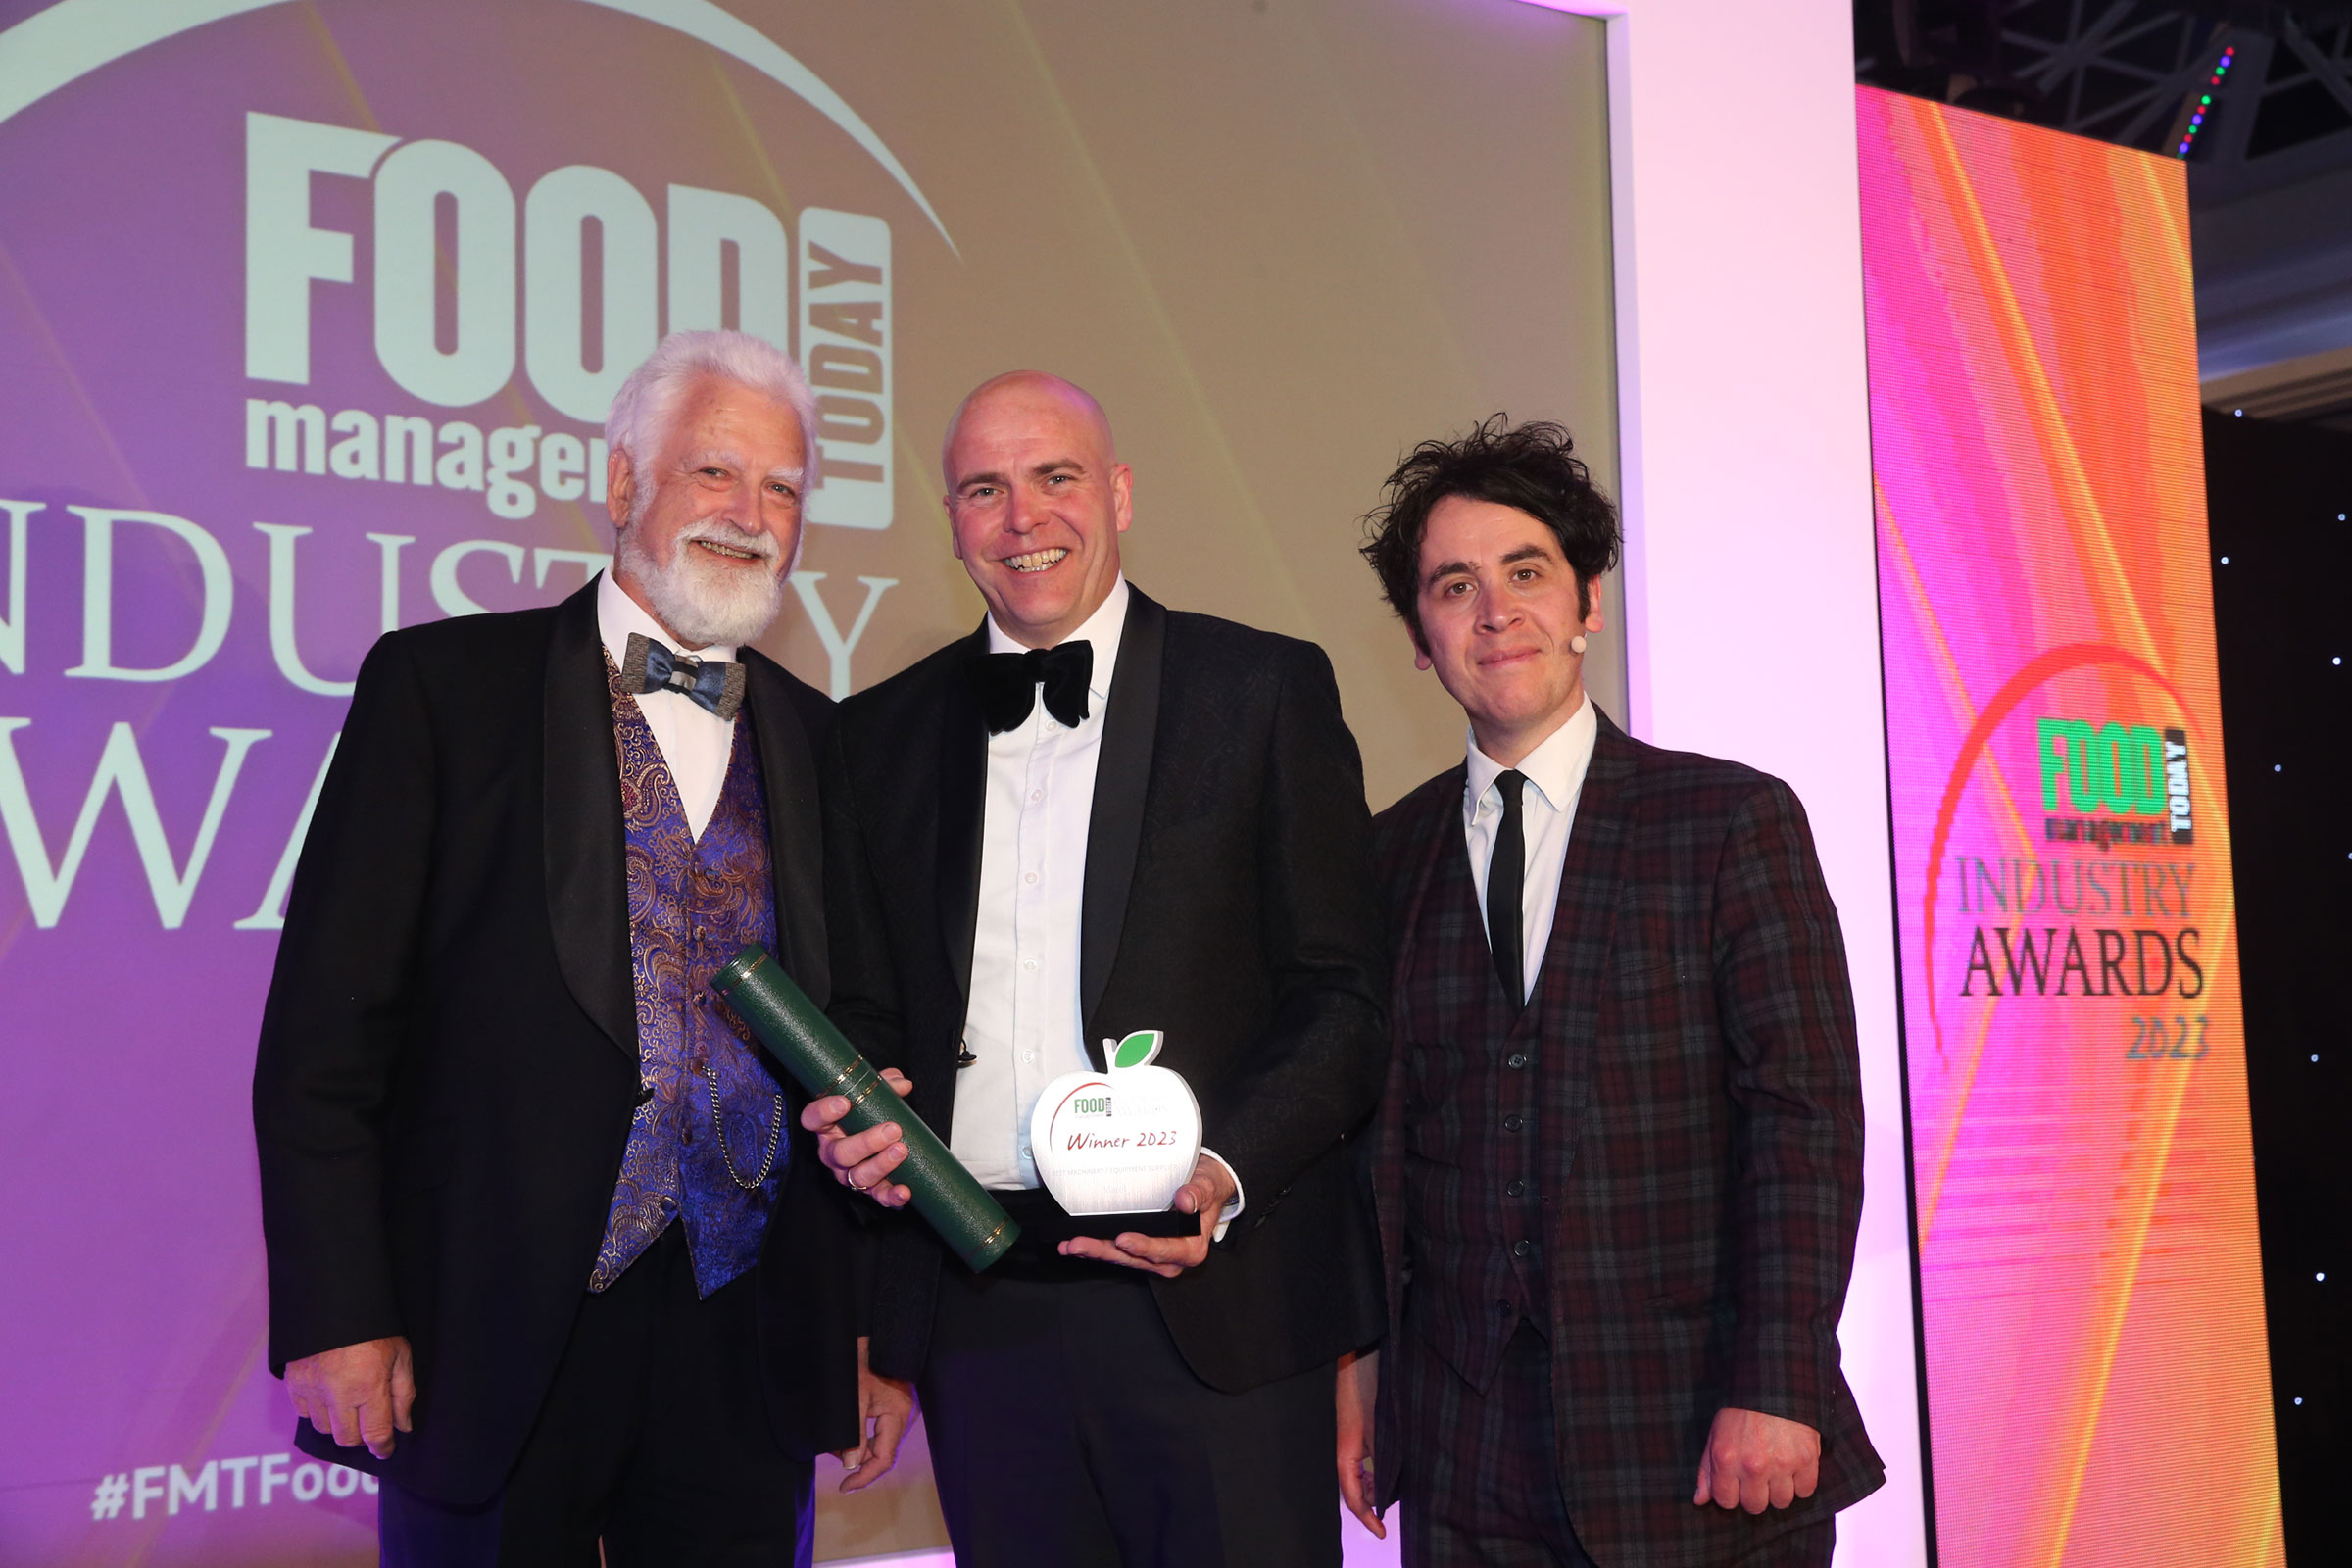 Marel wins at Food Management Today Industry Awards